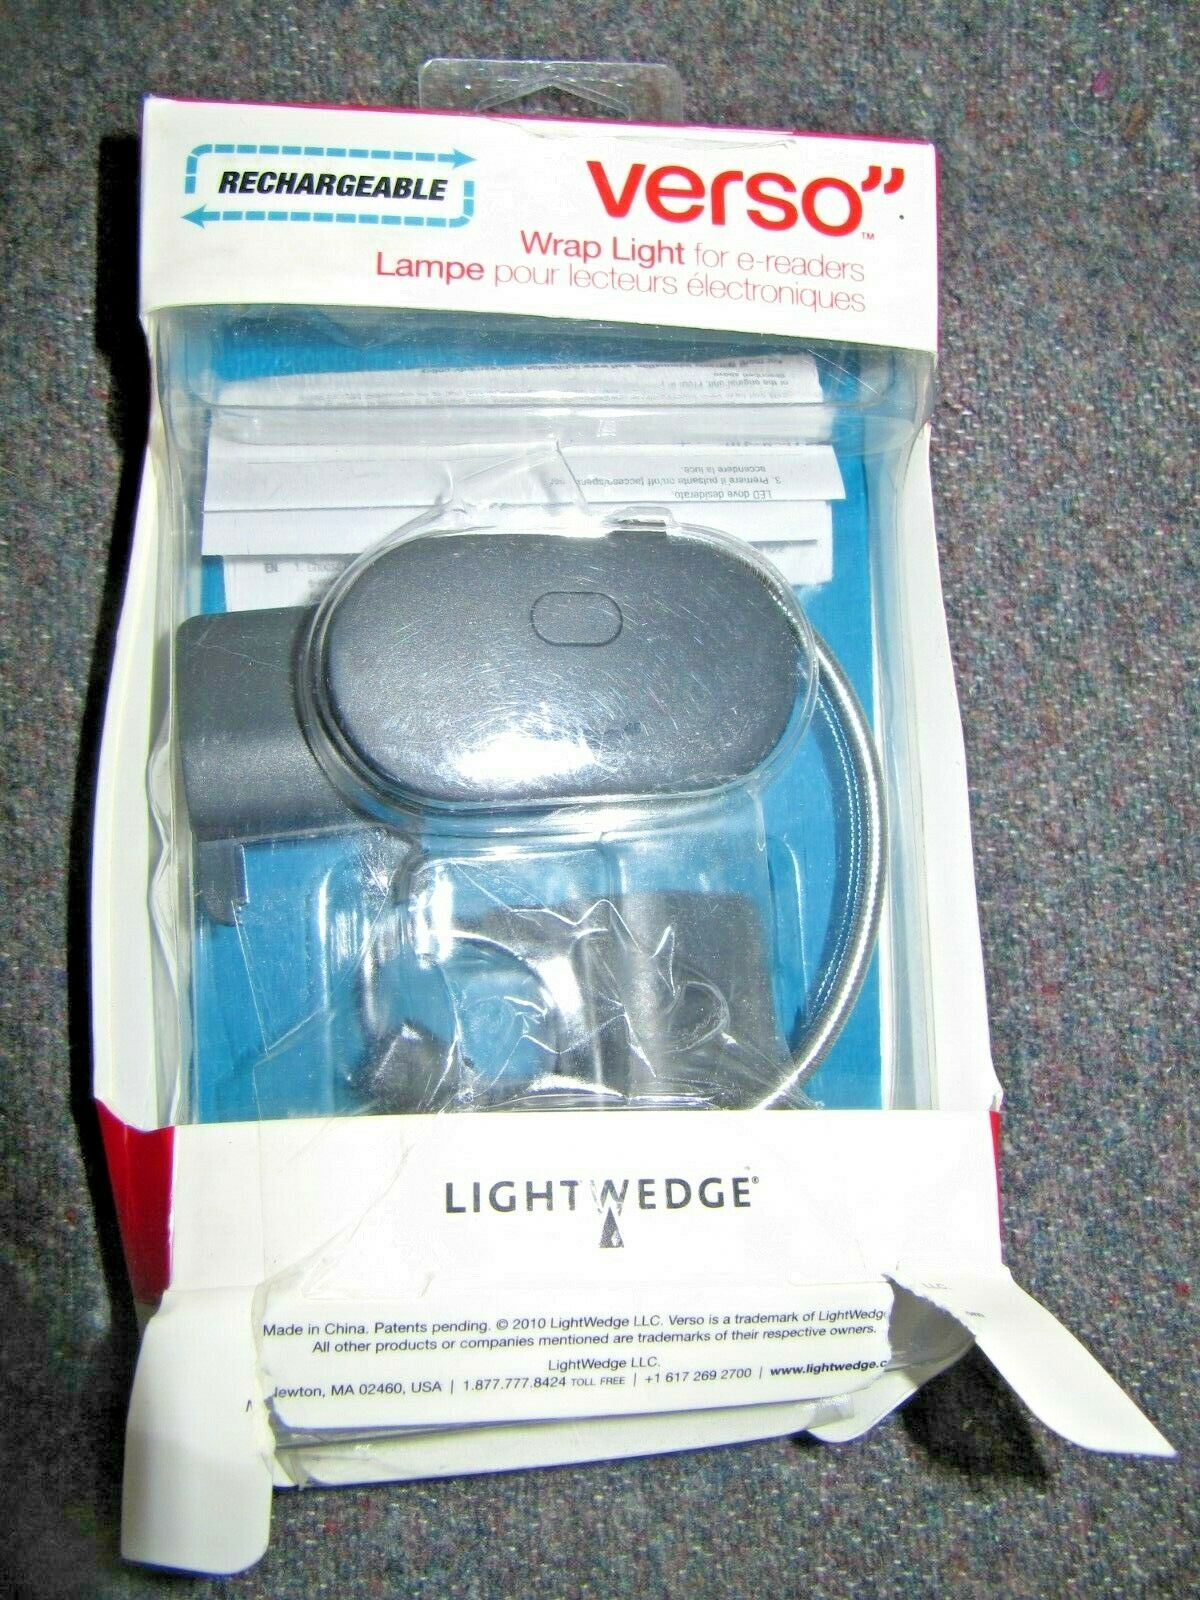 New Lightwedge Verso Rechargeable Wrap Light For E-readers